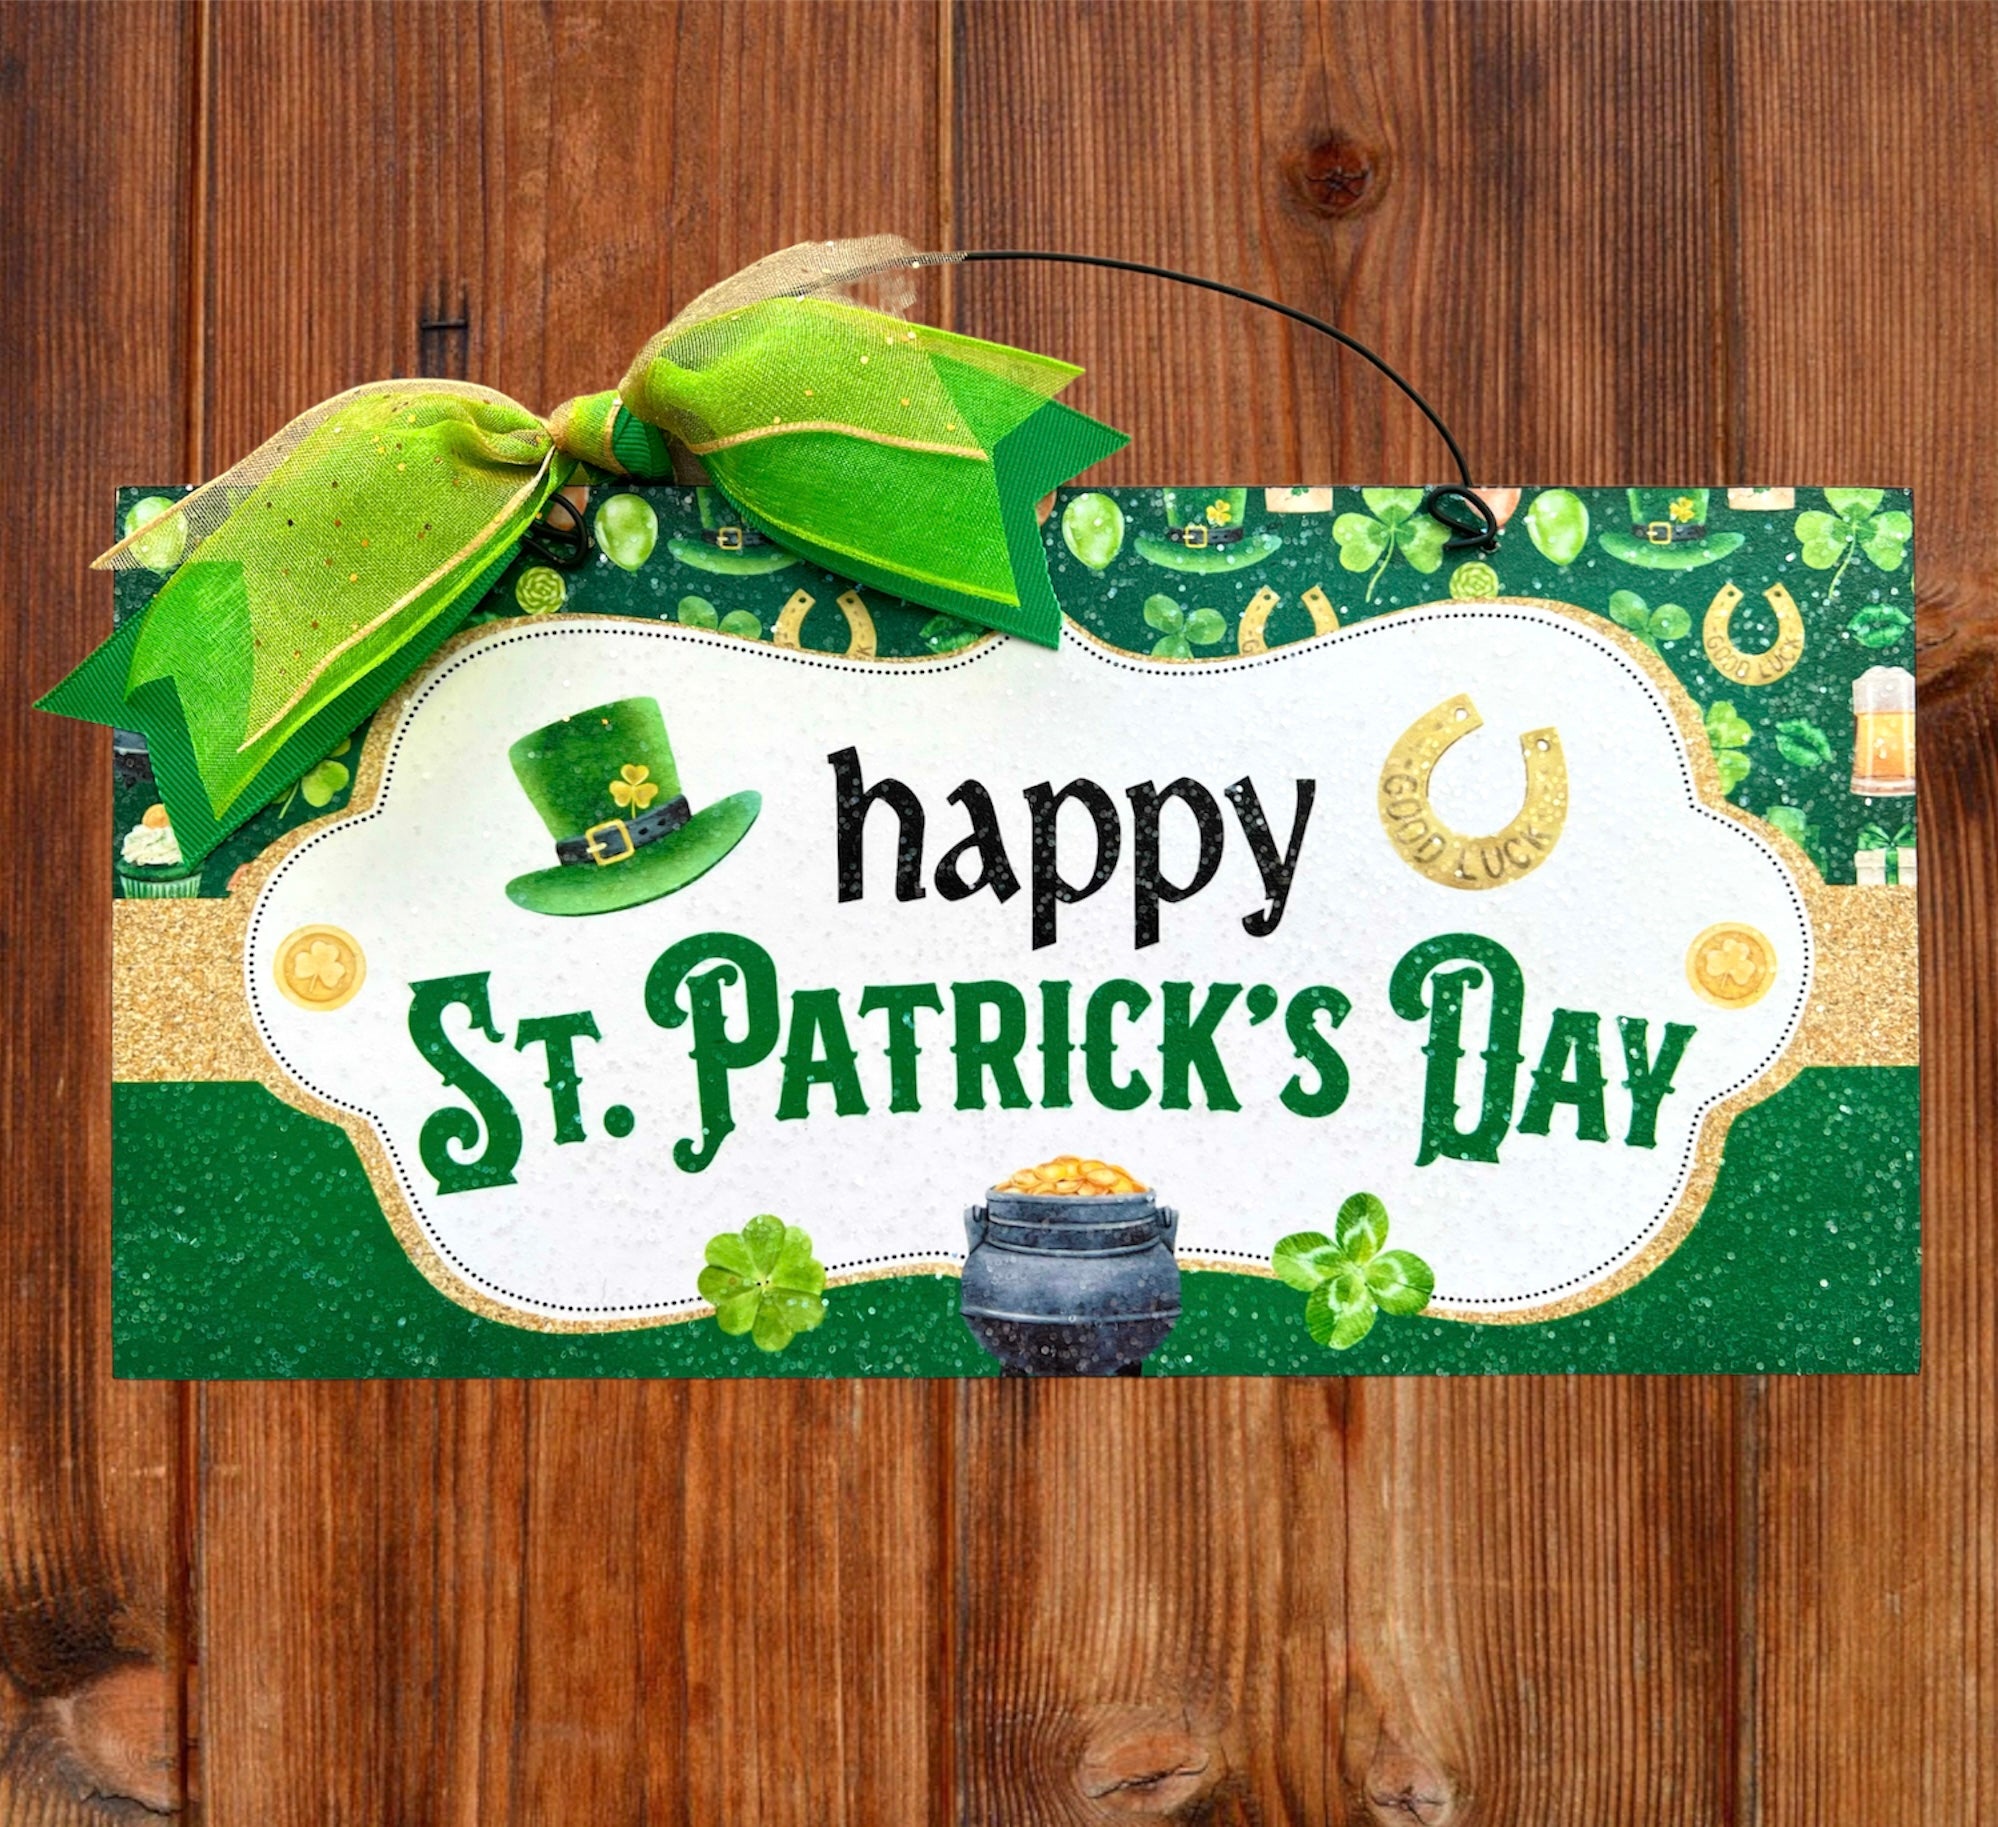 Happy St.Patrick's Day sign. Wood or metal option